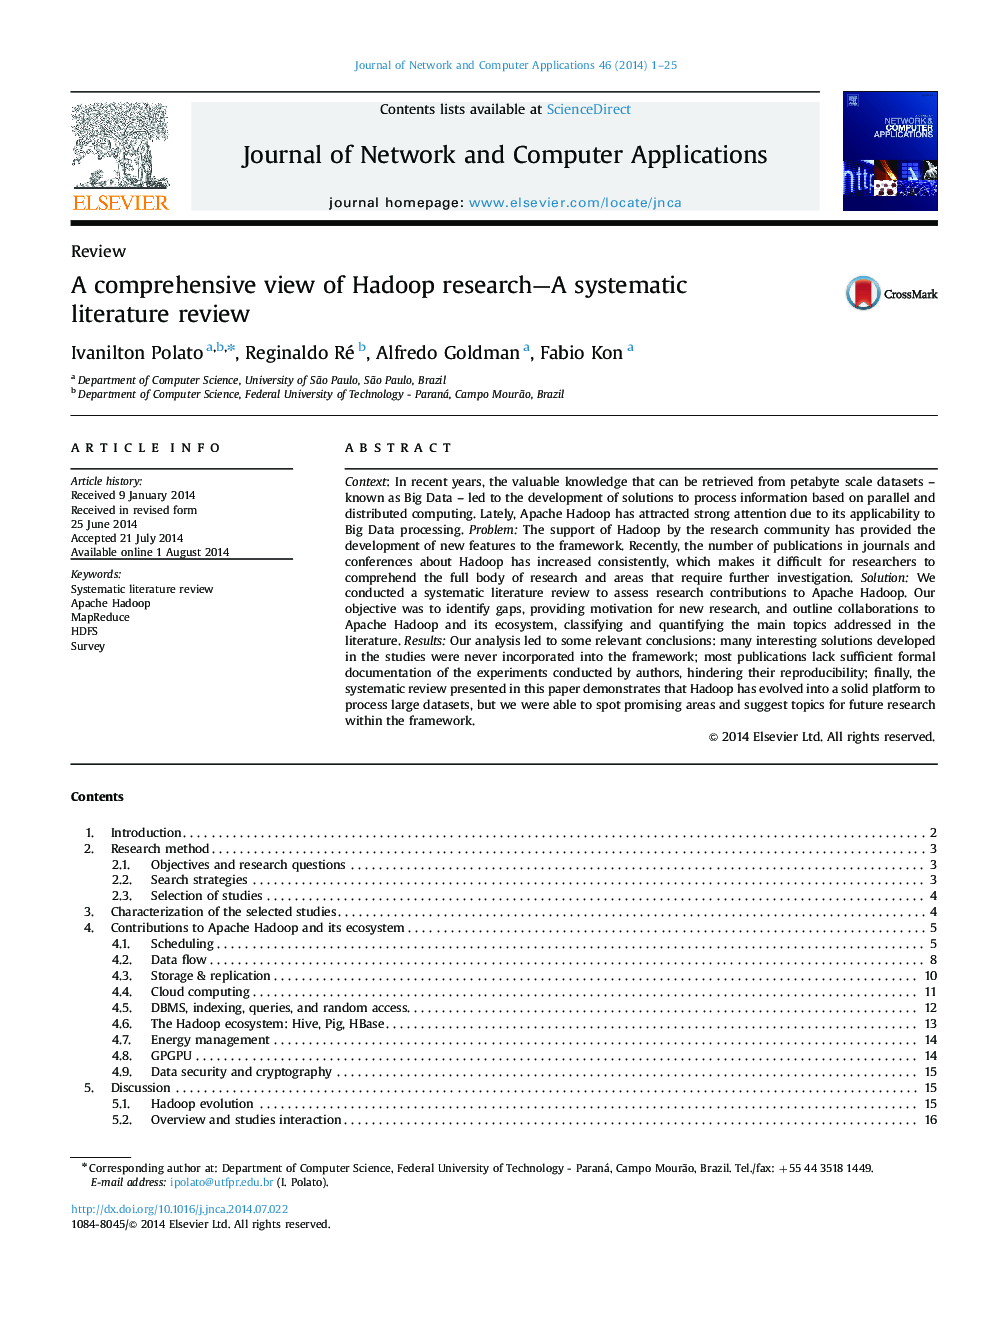 A comprehensive view of Hadoop research—A systematic literature review